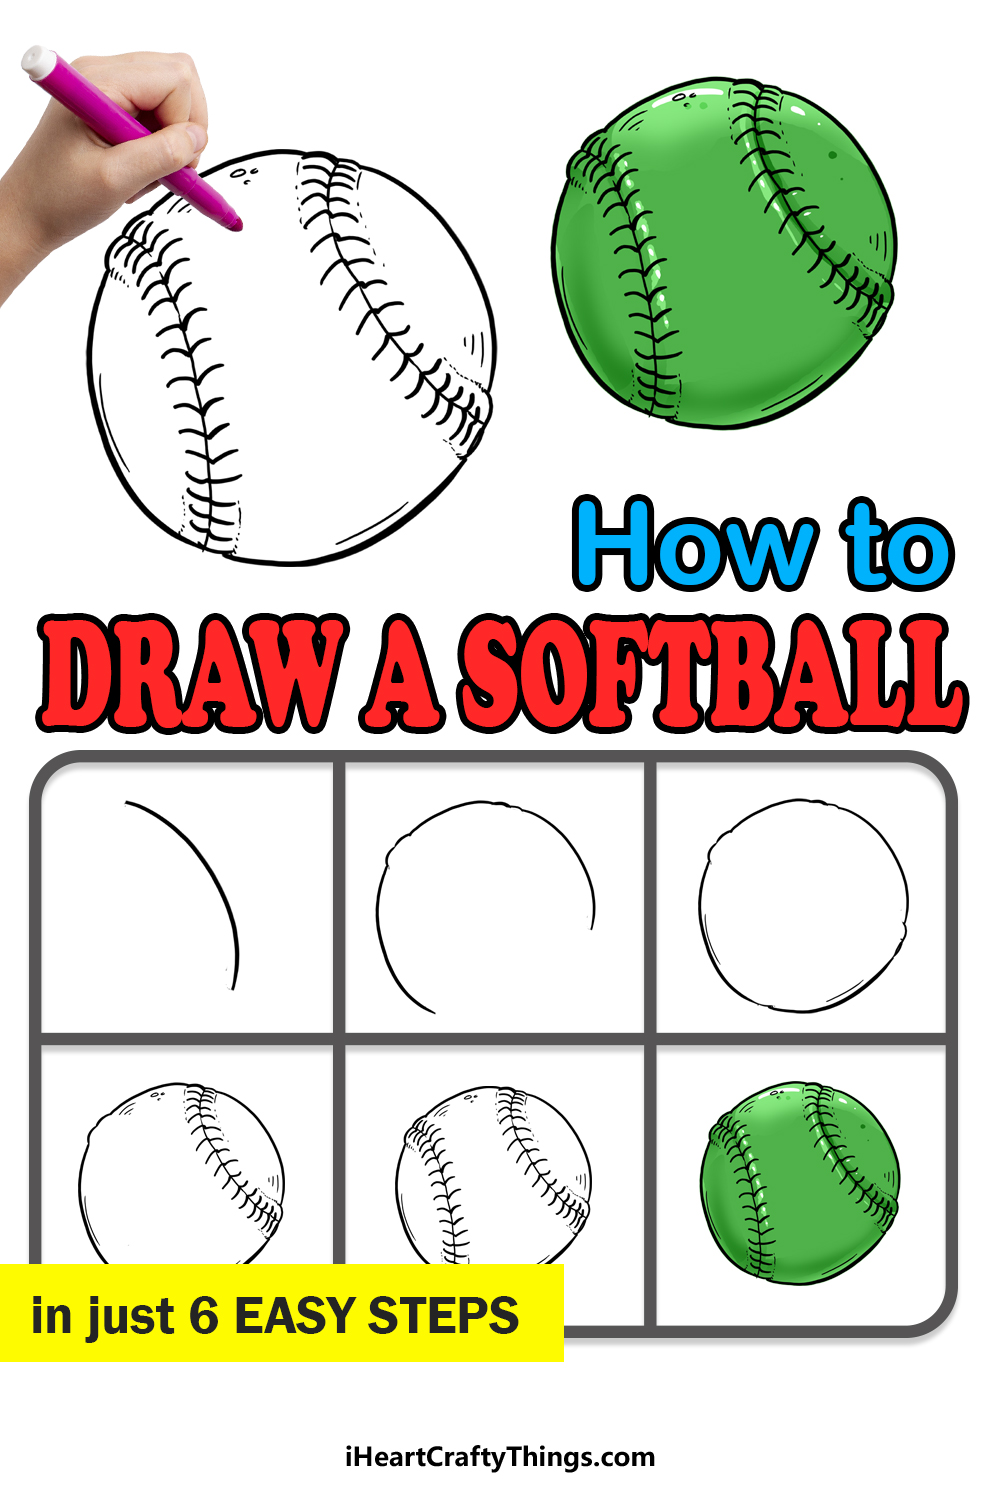 How to Draw A Softball step by step guide